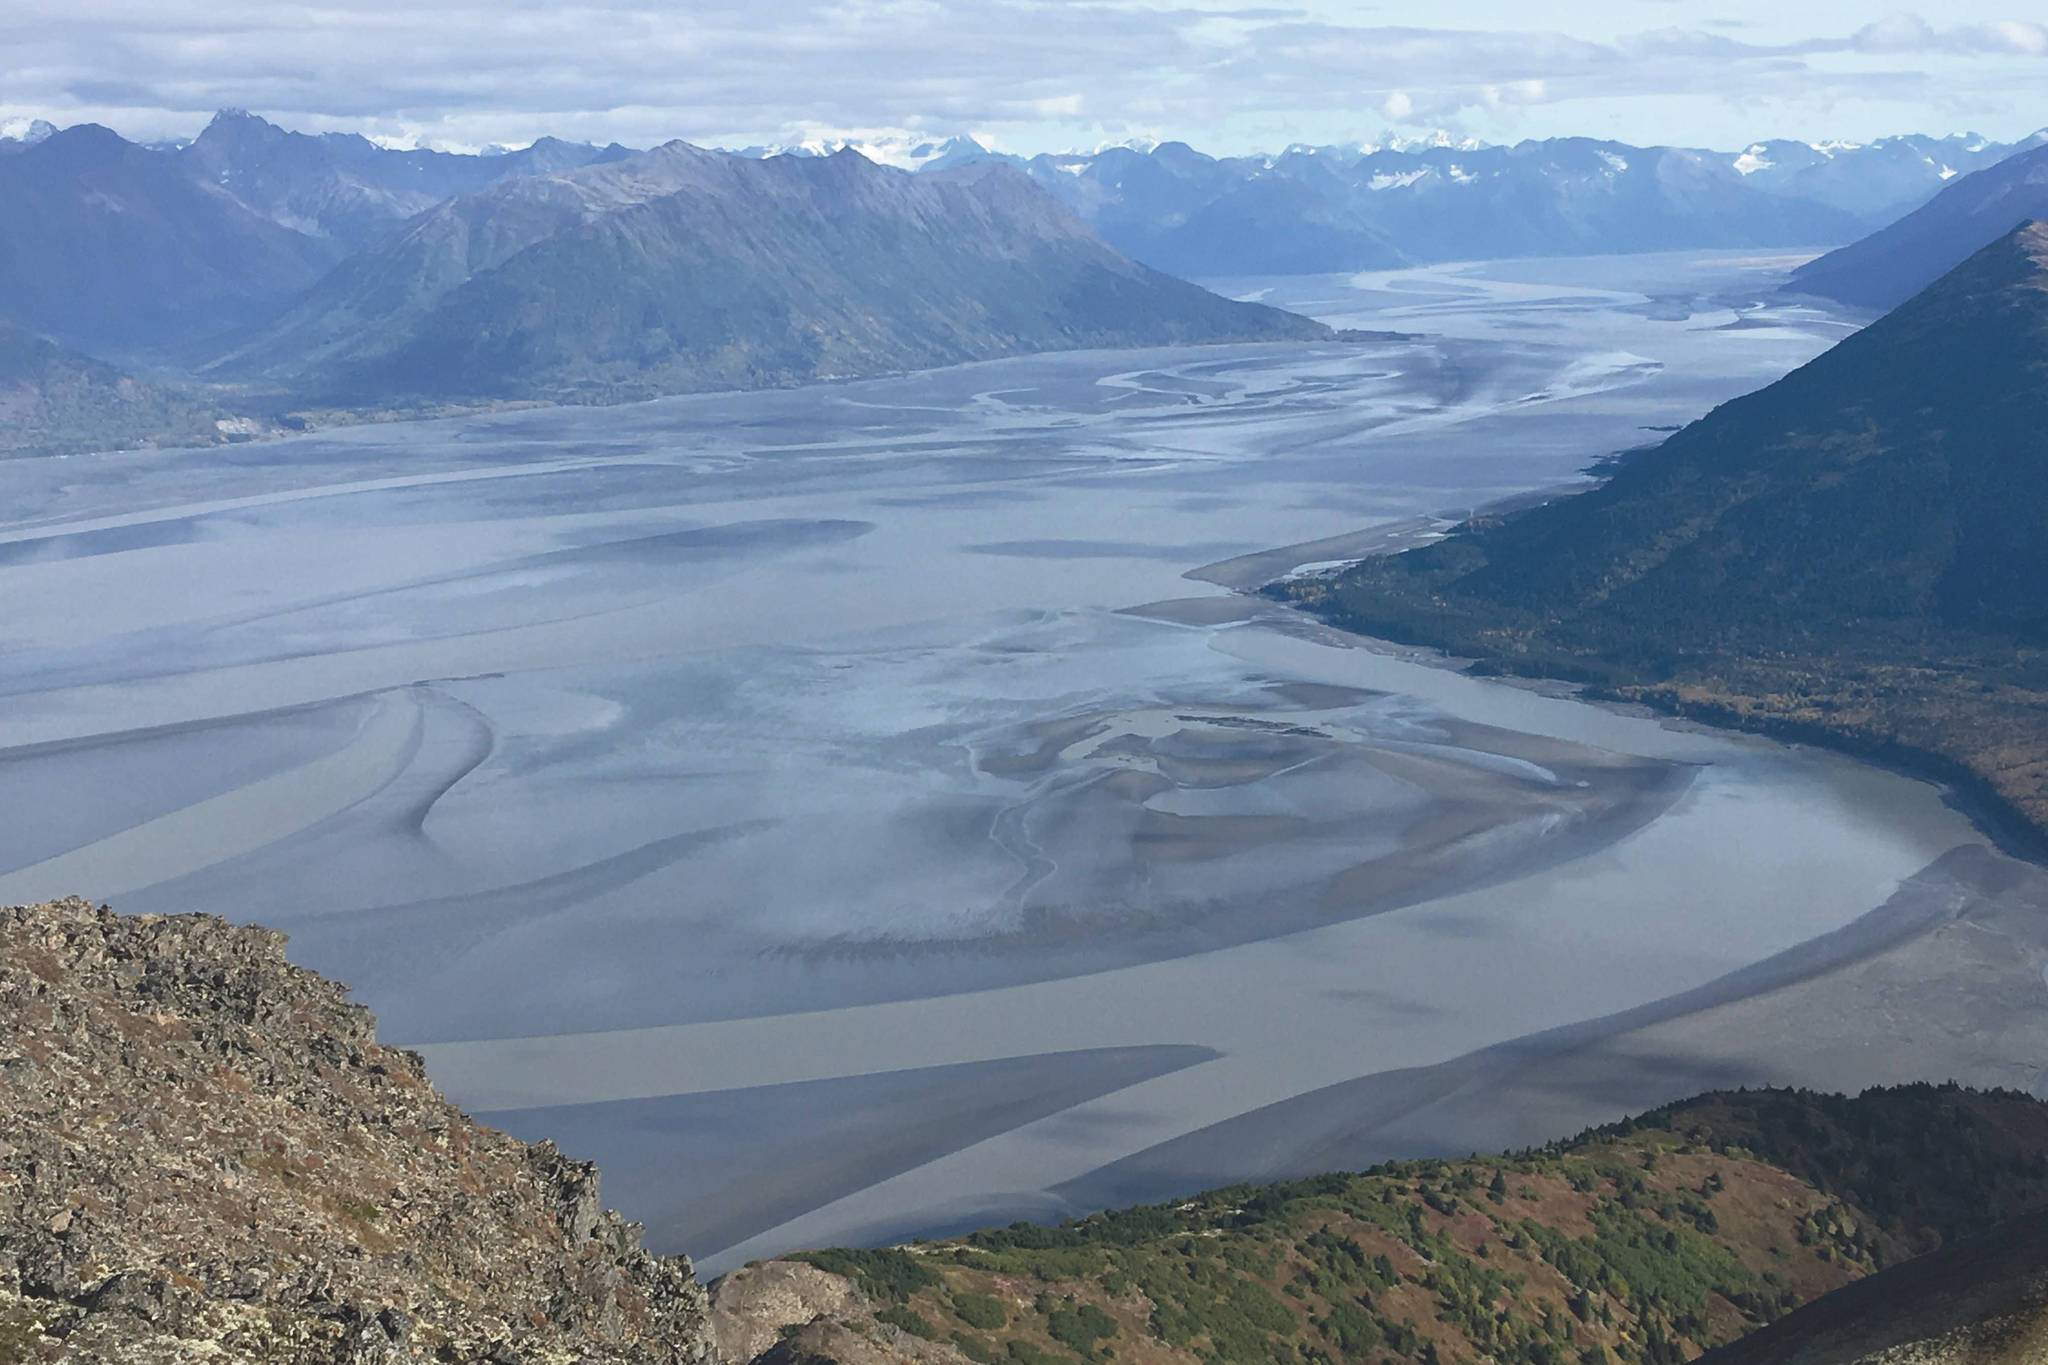 The view of Turnagain Arm, as seen from Hope Point in September 2018. Hope, Alaska, would be a good meeting place for a date once restrictions caused by the new coronavirus are lifted. (Photo by Jeff Helminiak/Peninsula Clarion)